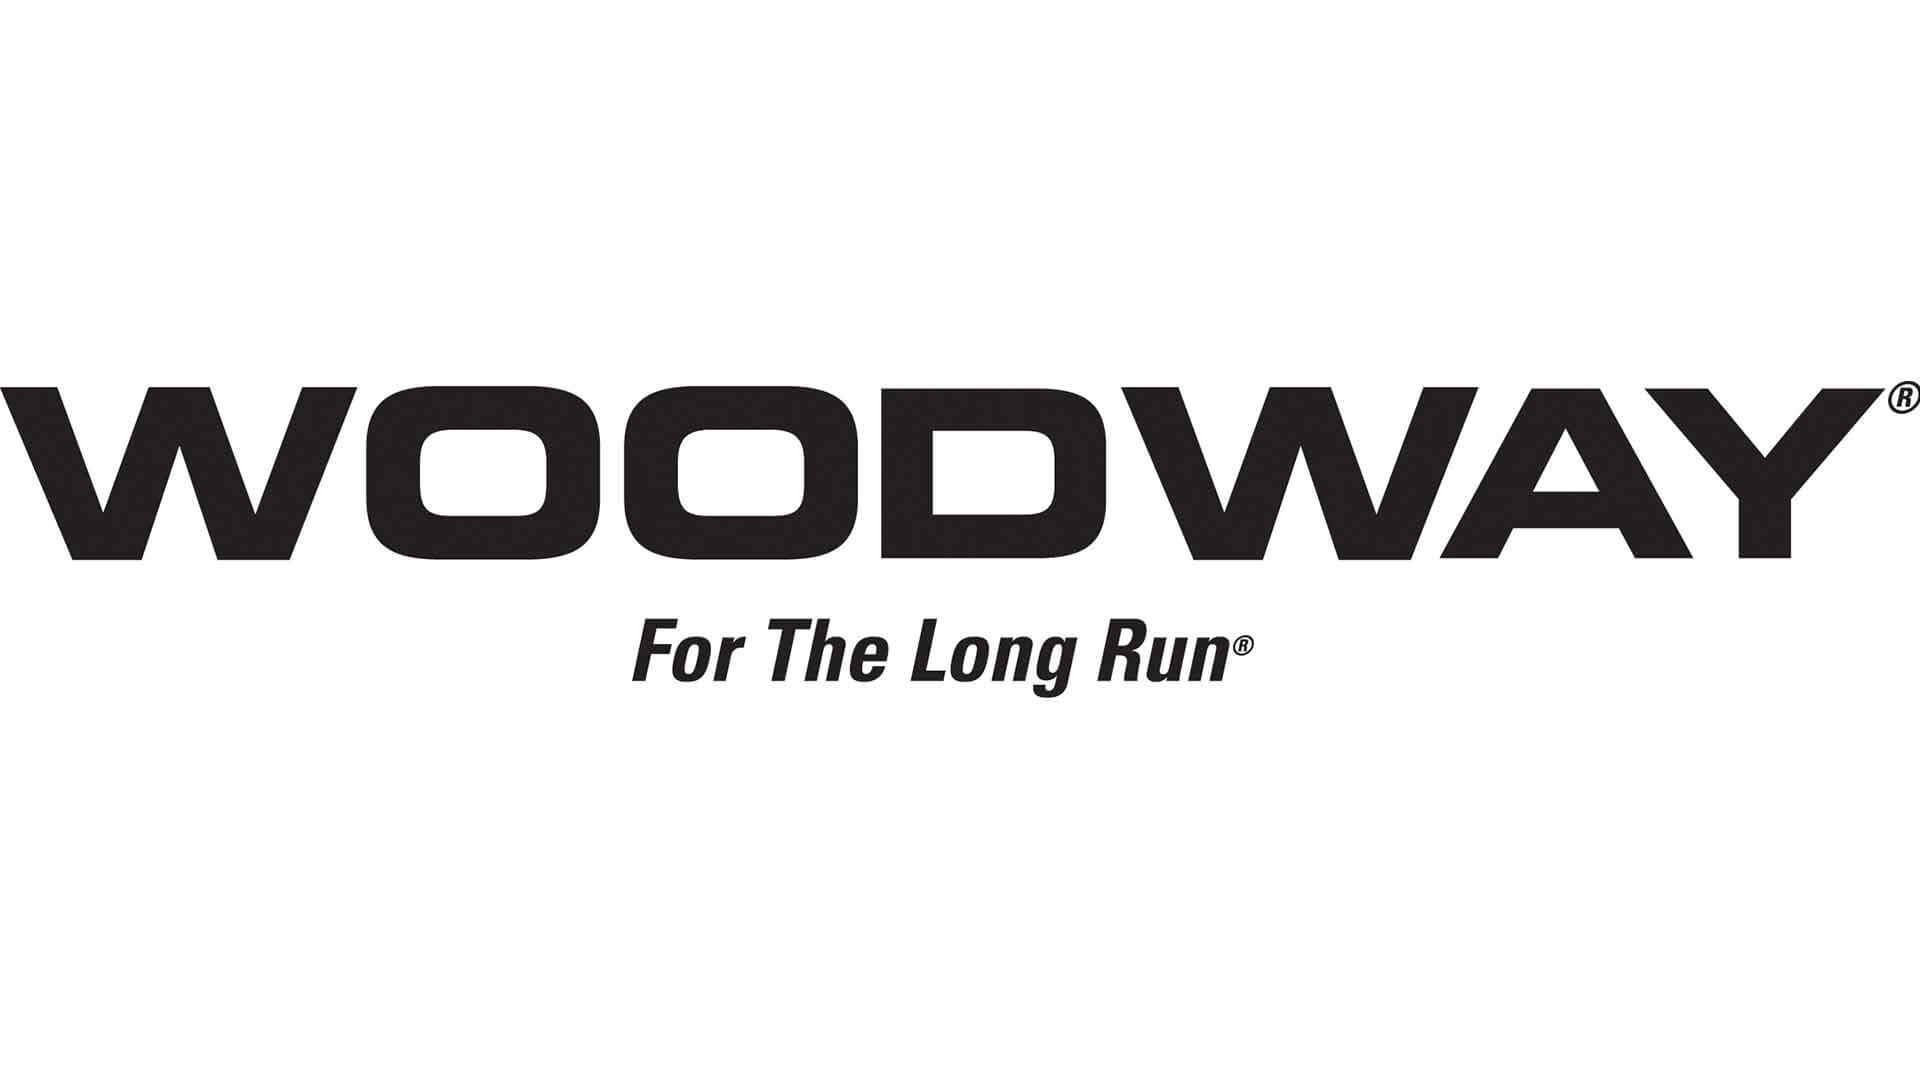 A logo of the company that is called goodwill.